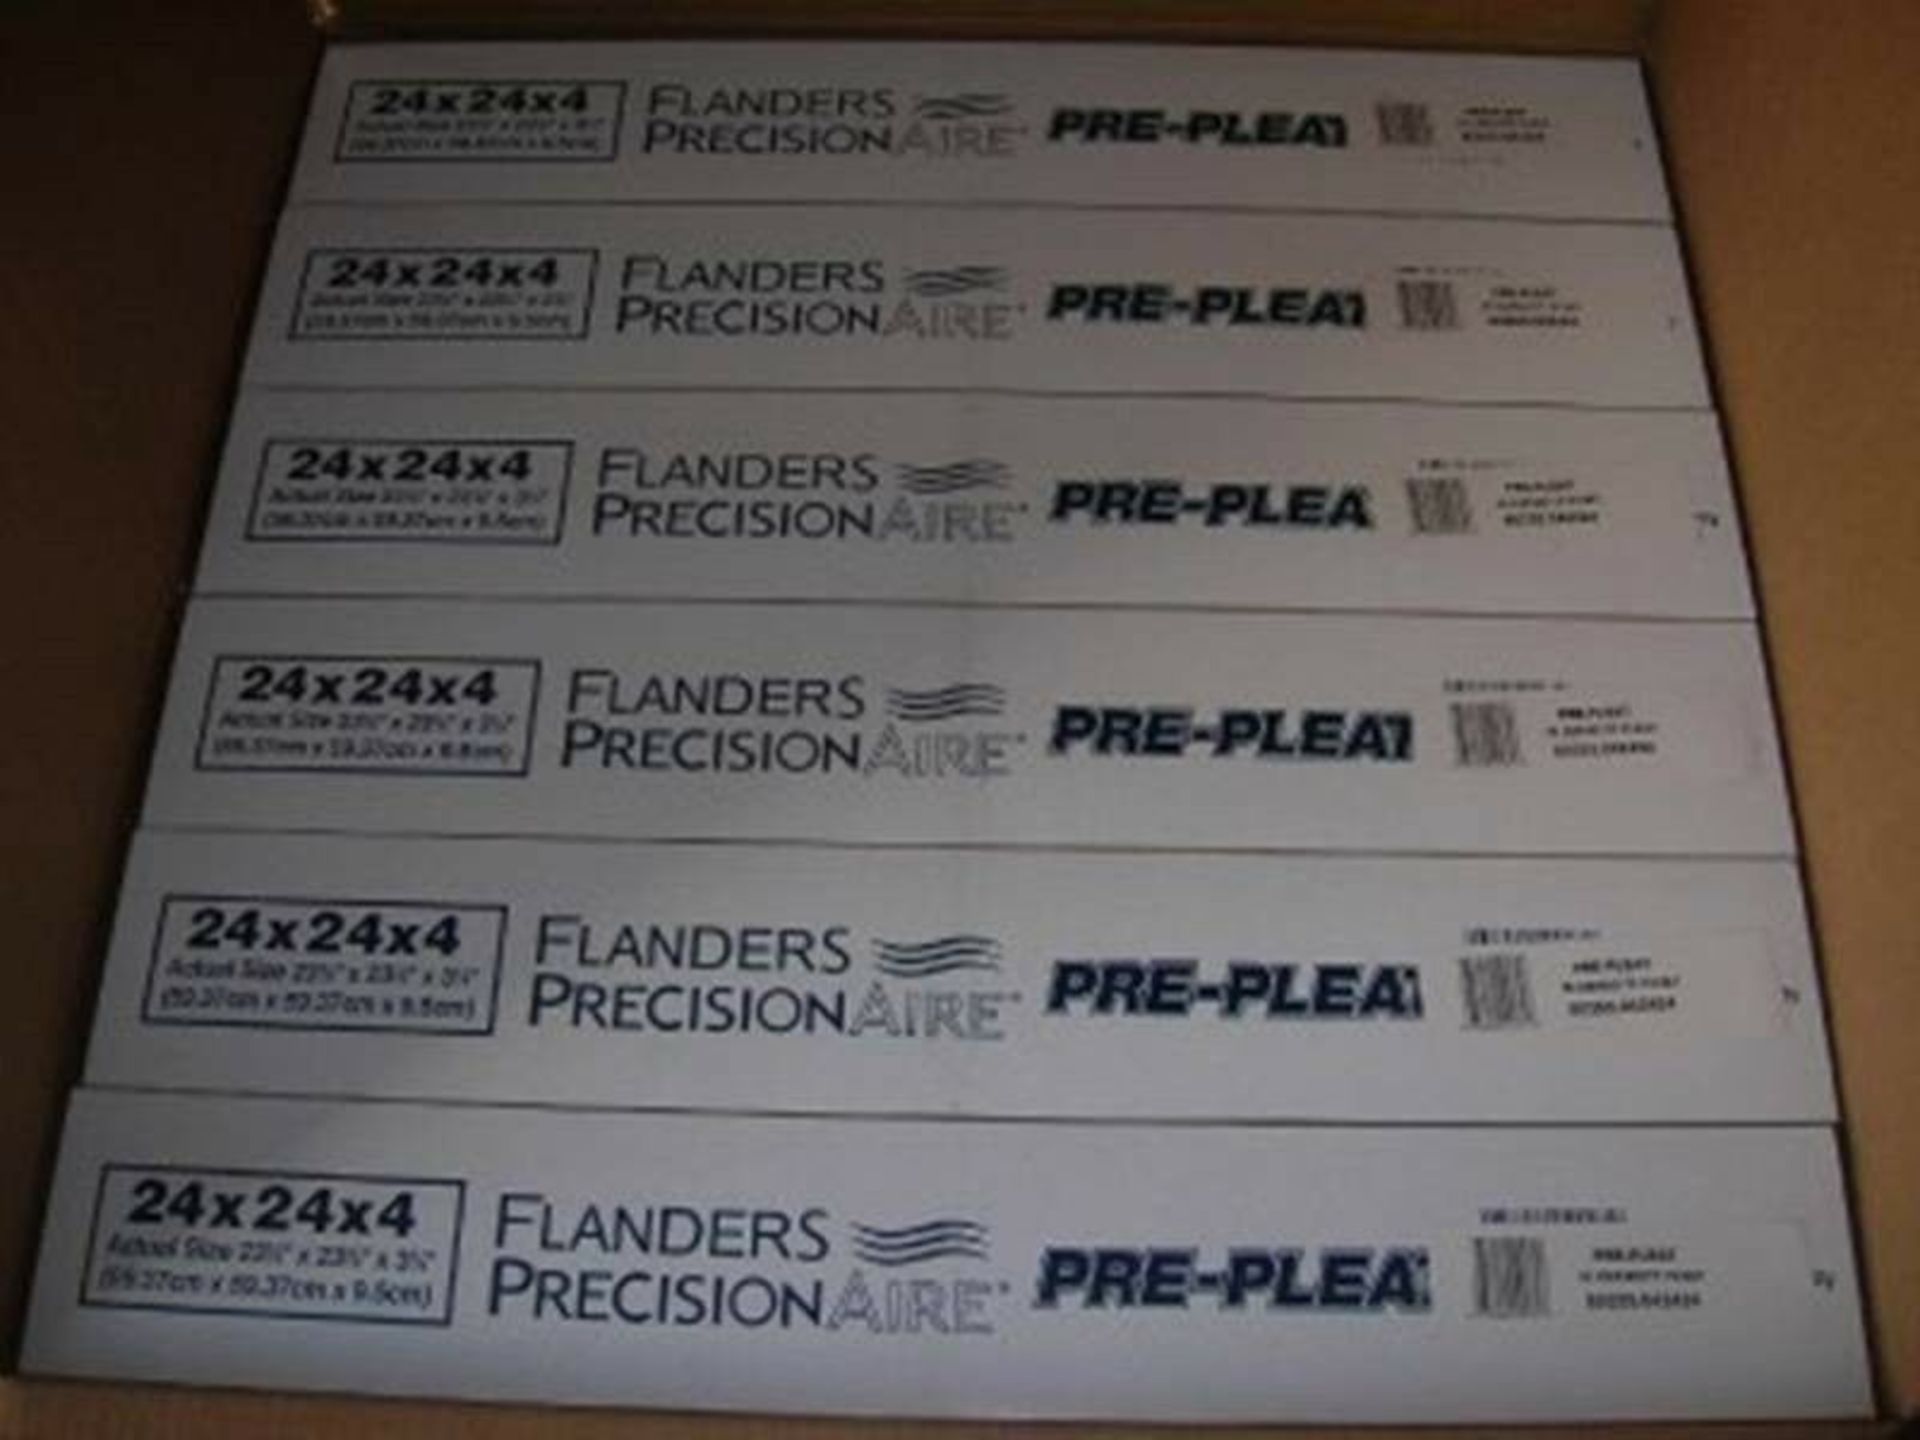 Flanders Precision Aire 24x24x4 Furnace / AC High Capacity Air Filter 6 Pack NEW - Image 2 of 4